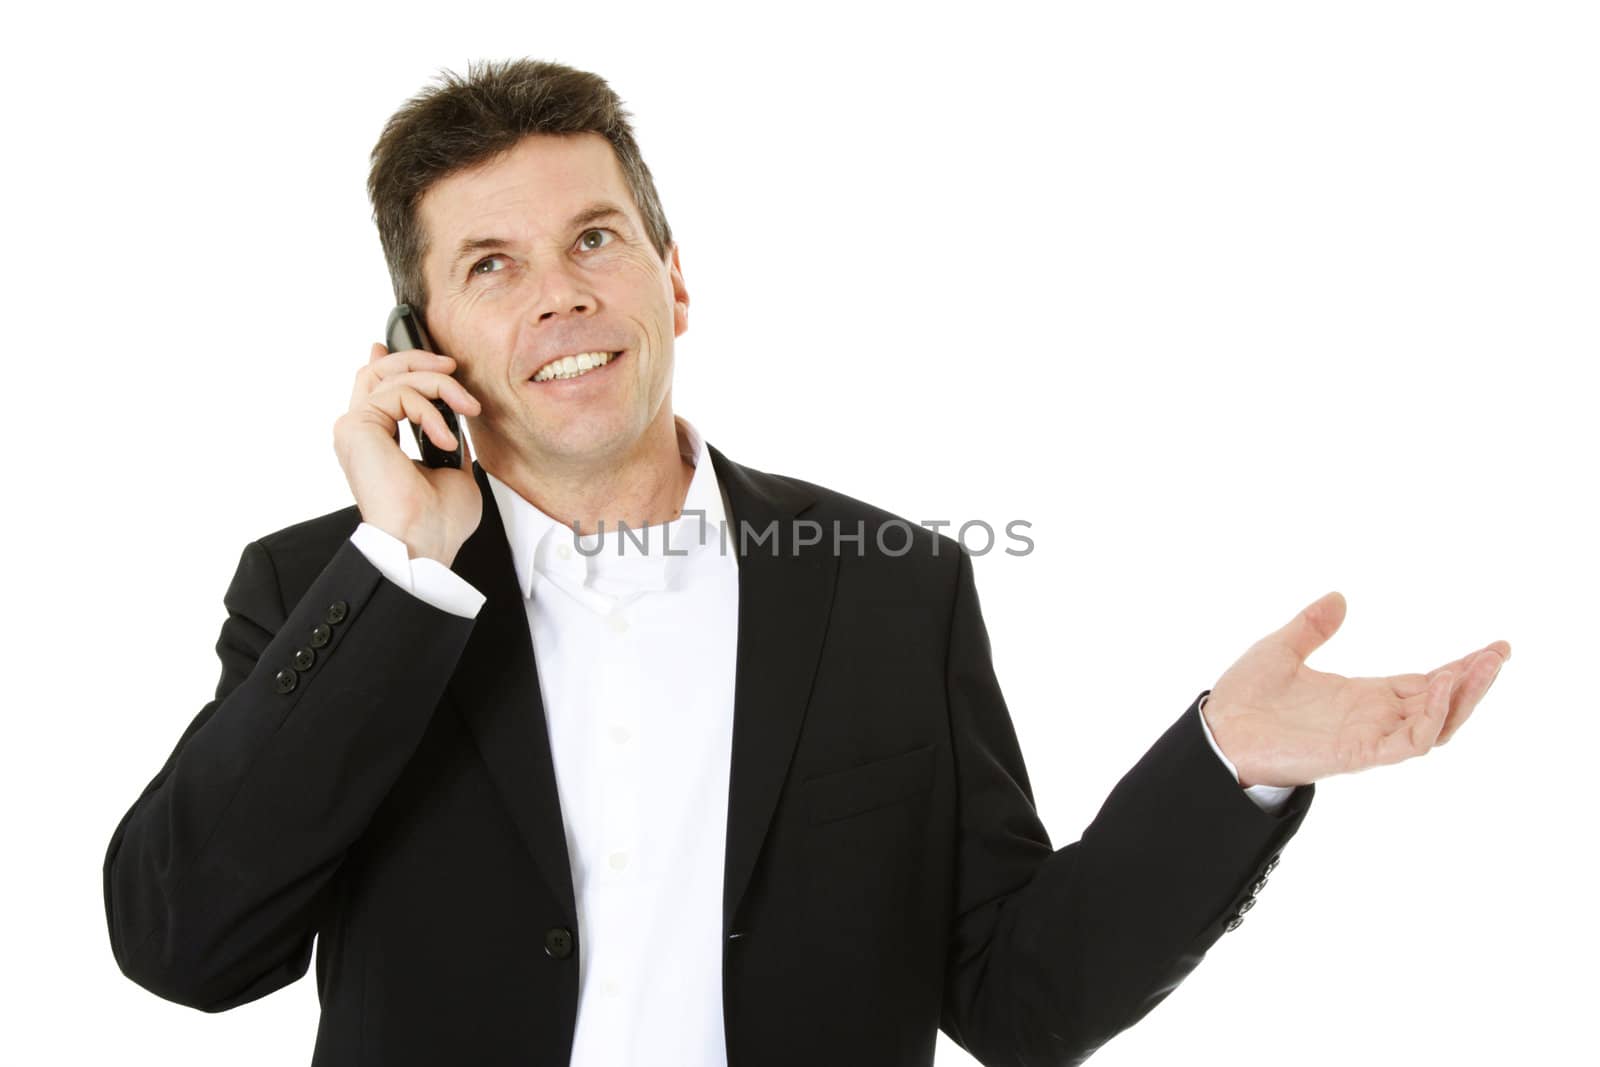 Attractive middle-aged man making a phone call. All on white background.